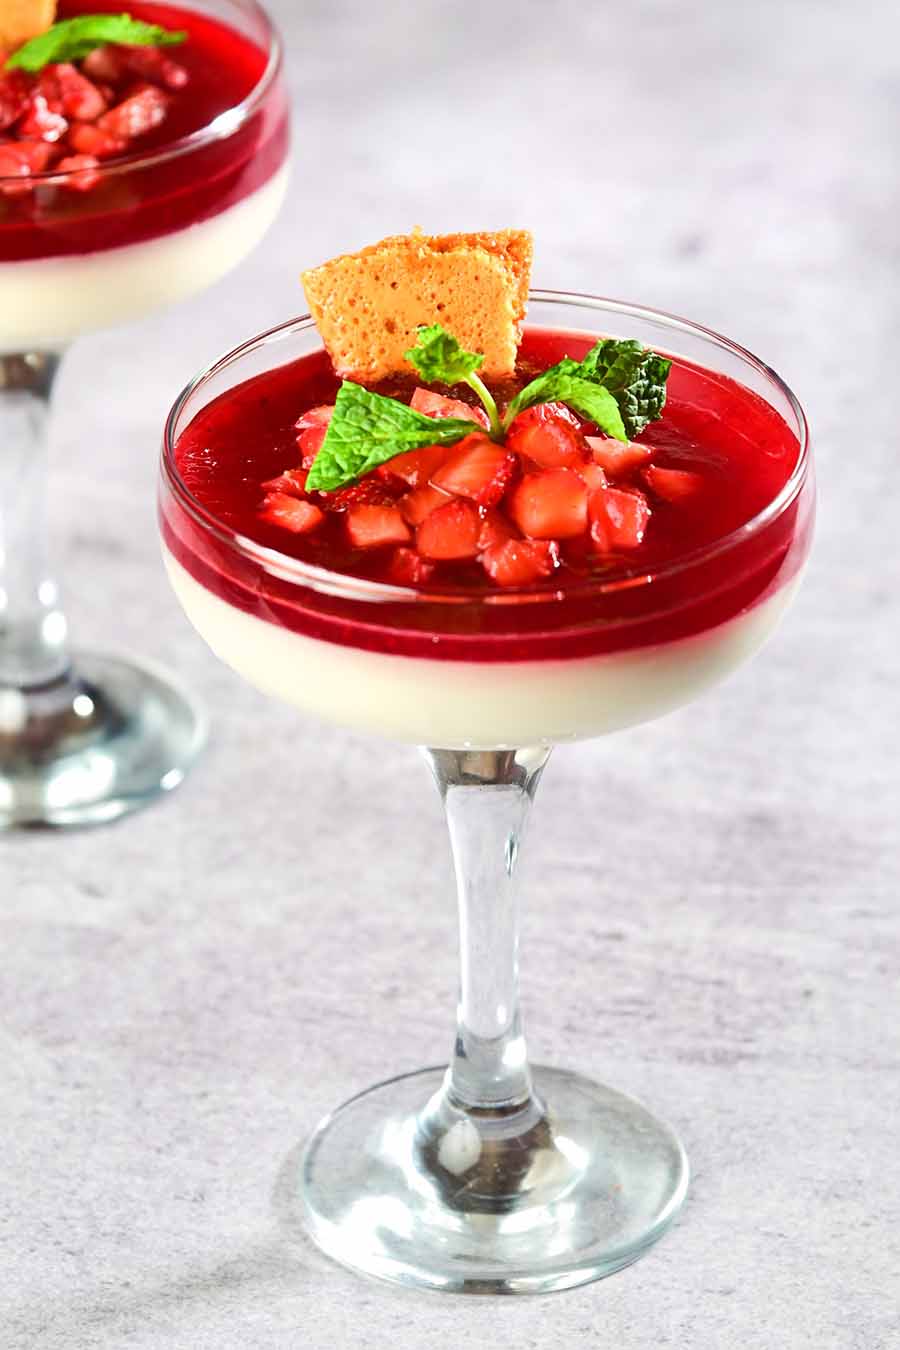 The Strawberry Panna Cotta features a smooth vanilla-infused panna cotta with a layer of vibrant strawberry compote and topped with fresh slices of strawberries. The sweet and rich panna cotta mixed with the slight tart flavours of the strawberry create an appealing combination